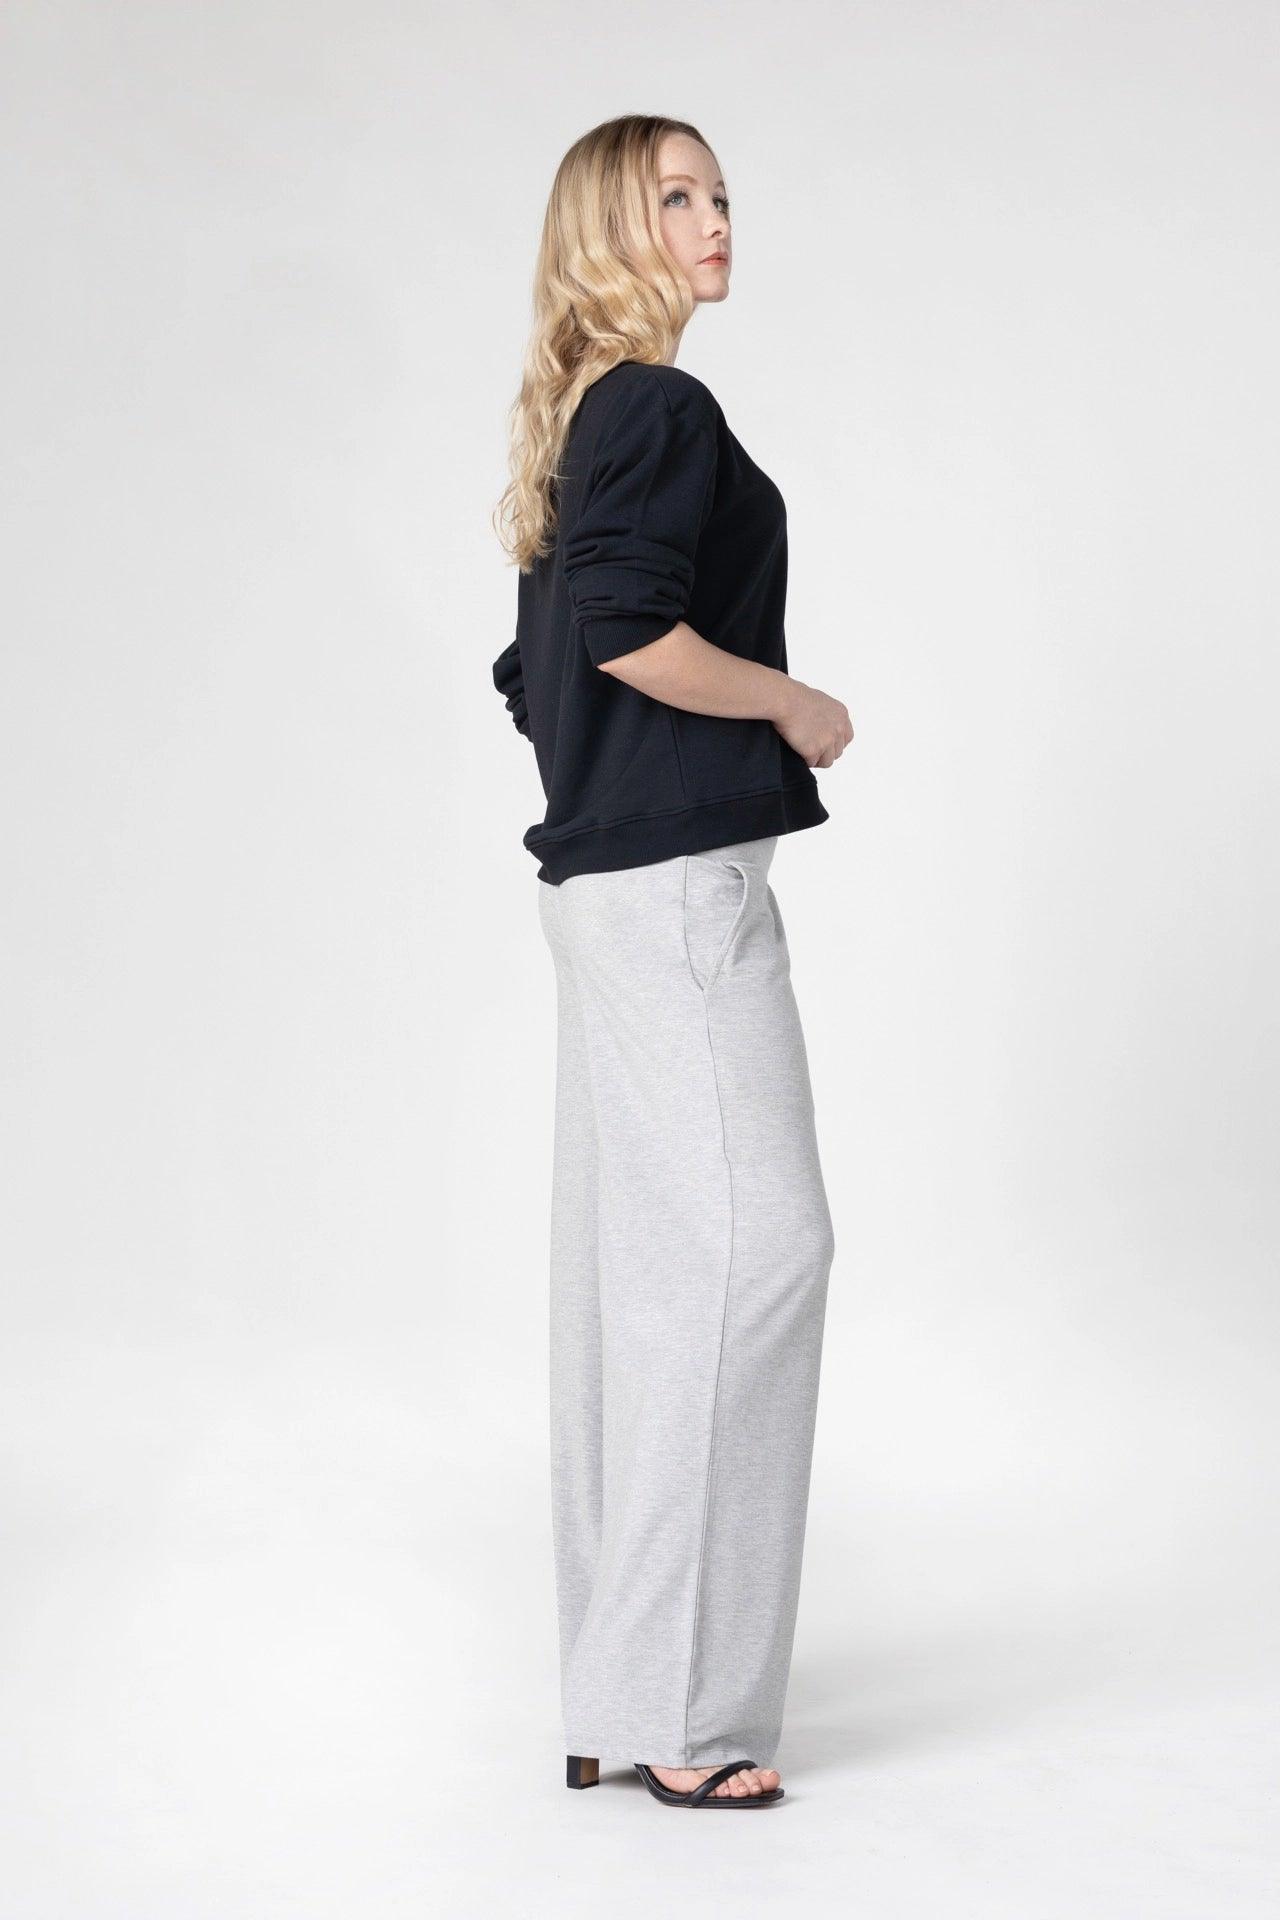 Women&#39;s Super-Soft, High-Rise, Relaxed Fit Wide Leg Sweatpant - NOT LABELED